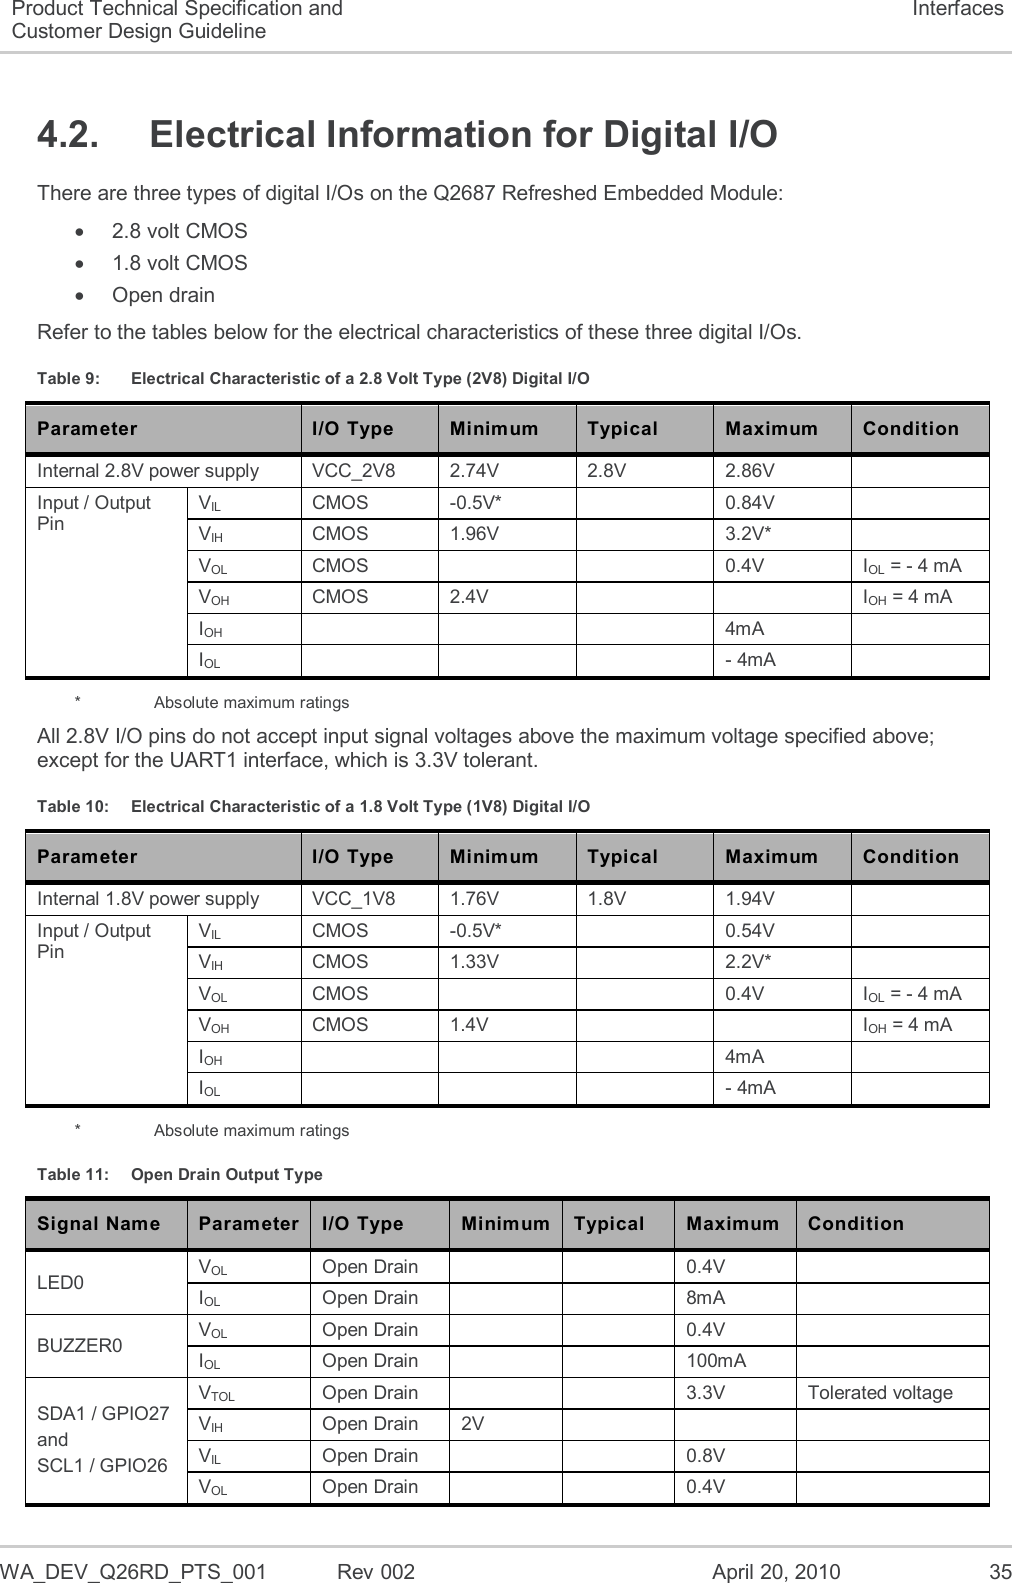  WA_DEV_Q26RD_PTS_001  Rev 002  April 20, 2010 35 Product Technical Specification and Customer Design Guideline Interfaces 4.2.  Electrical Information for Digital I/O There are three types of digital I/Os on the Q2687 Refreshed Embedded Module:   2.8 volt CMOS   1.8 volt CMOS   Open drain Refer to the tables below for the electrical characteristics of these three digital I/Os. Table 9:  Electrical Characteristic of a 2.8 Volt Type (2V8) Digital I/O Parameter I/O Type Minimum Typical Maximum Condition Internal 2.8V power supply VCC_2V8 2.74V 2.8V 2.86V  Input / Output Pin VIL CMOS -0.5V*  0.84V  VIH CMOS 1.96V  3.2V*  VOL CMOS   0.4V IOL = - 4 mA VOH CMOS 2.4V   IOH = 4 mA IOH    4mA  IOL    - 4mA  *    Absolute maximum ratings All 2.8V I/O pins do not accept input signal voltages above the maximum voltage specified above; except for the UART1 interface, which is 3.3V tolerant. Table 10:  Electrical Characteristic of a 1.8 Volt Type (1V8) Digital I/O Parameter I/O Type Minimum Typical Maximum Condition Internal 1.8V power supply VCC_1V8 1.76V 1.8V 1.94V  Input / Output Pin VIL CMOS -0.5V*  0.54V  VIH CMOS 1.33V  2.2V*  VOL CMOS   0.4V IOL = - 4 mA VOH CMOS 1.4V   IOH = 4 mA IOH    4mA  IOL    - 4mA  *    Absolute maximum ratings Table 11:  Open Drain Output Type Signal Name Parameter I/O Type Minimum Typical Maximum Condition LED0 VOL Open Drain   0.4V  IOL Open Drain   8mA  BUZZER0 VOL Open Drain   0.4V  IOL Open Drain   100mA  SDA1 / GPIO27  and SCL1 / GPIO26 VTOL Open Drain   3.3V Tolerated voltage VIH Open Drain 2V    VIL Open Drain   0.8V  VOL Open Drain   0.4V  